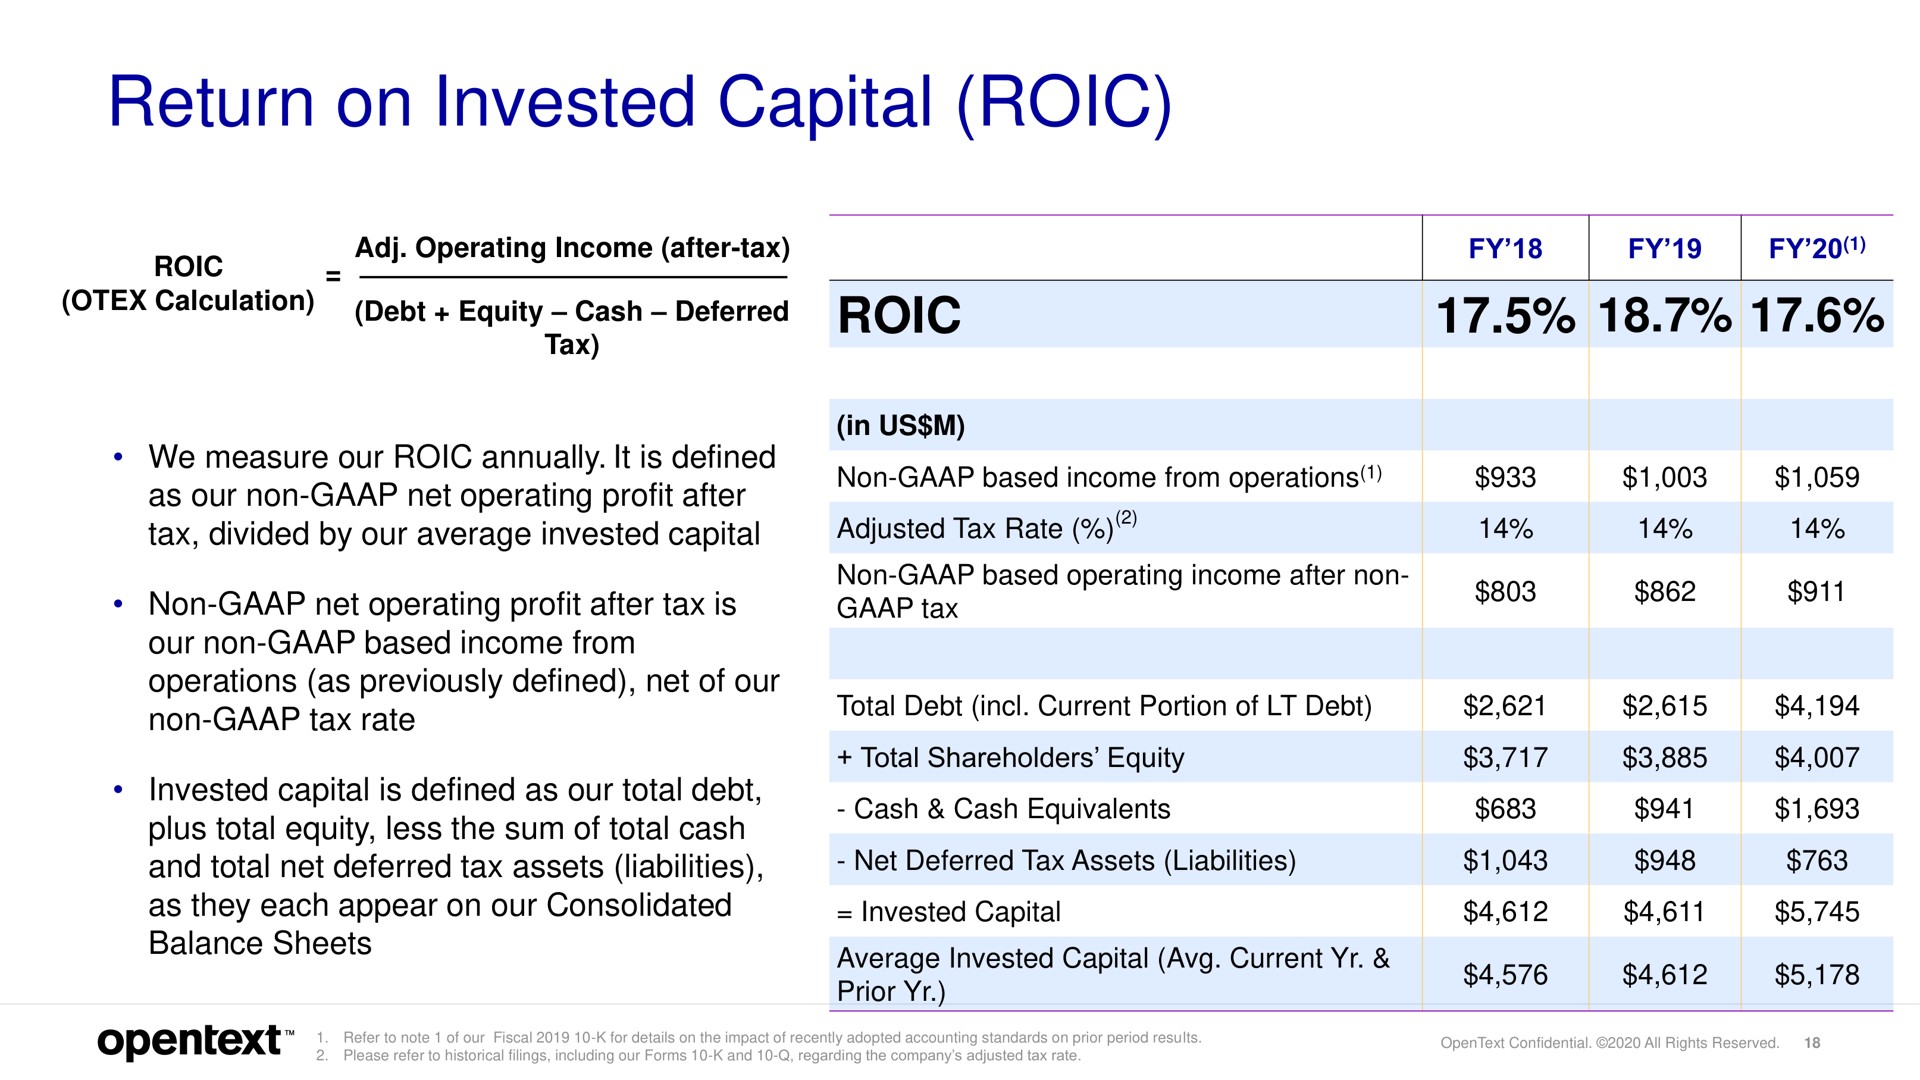 return on invested capital | OpenText